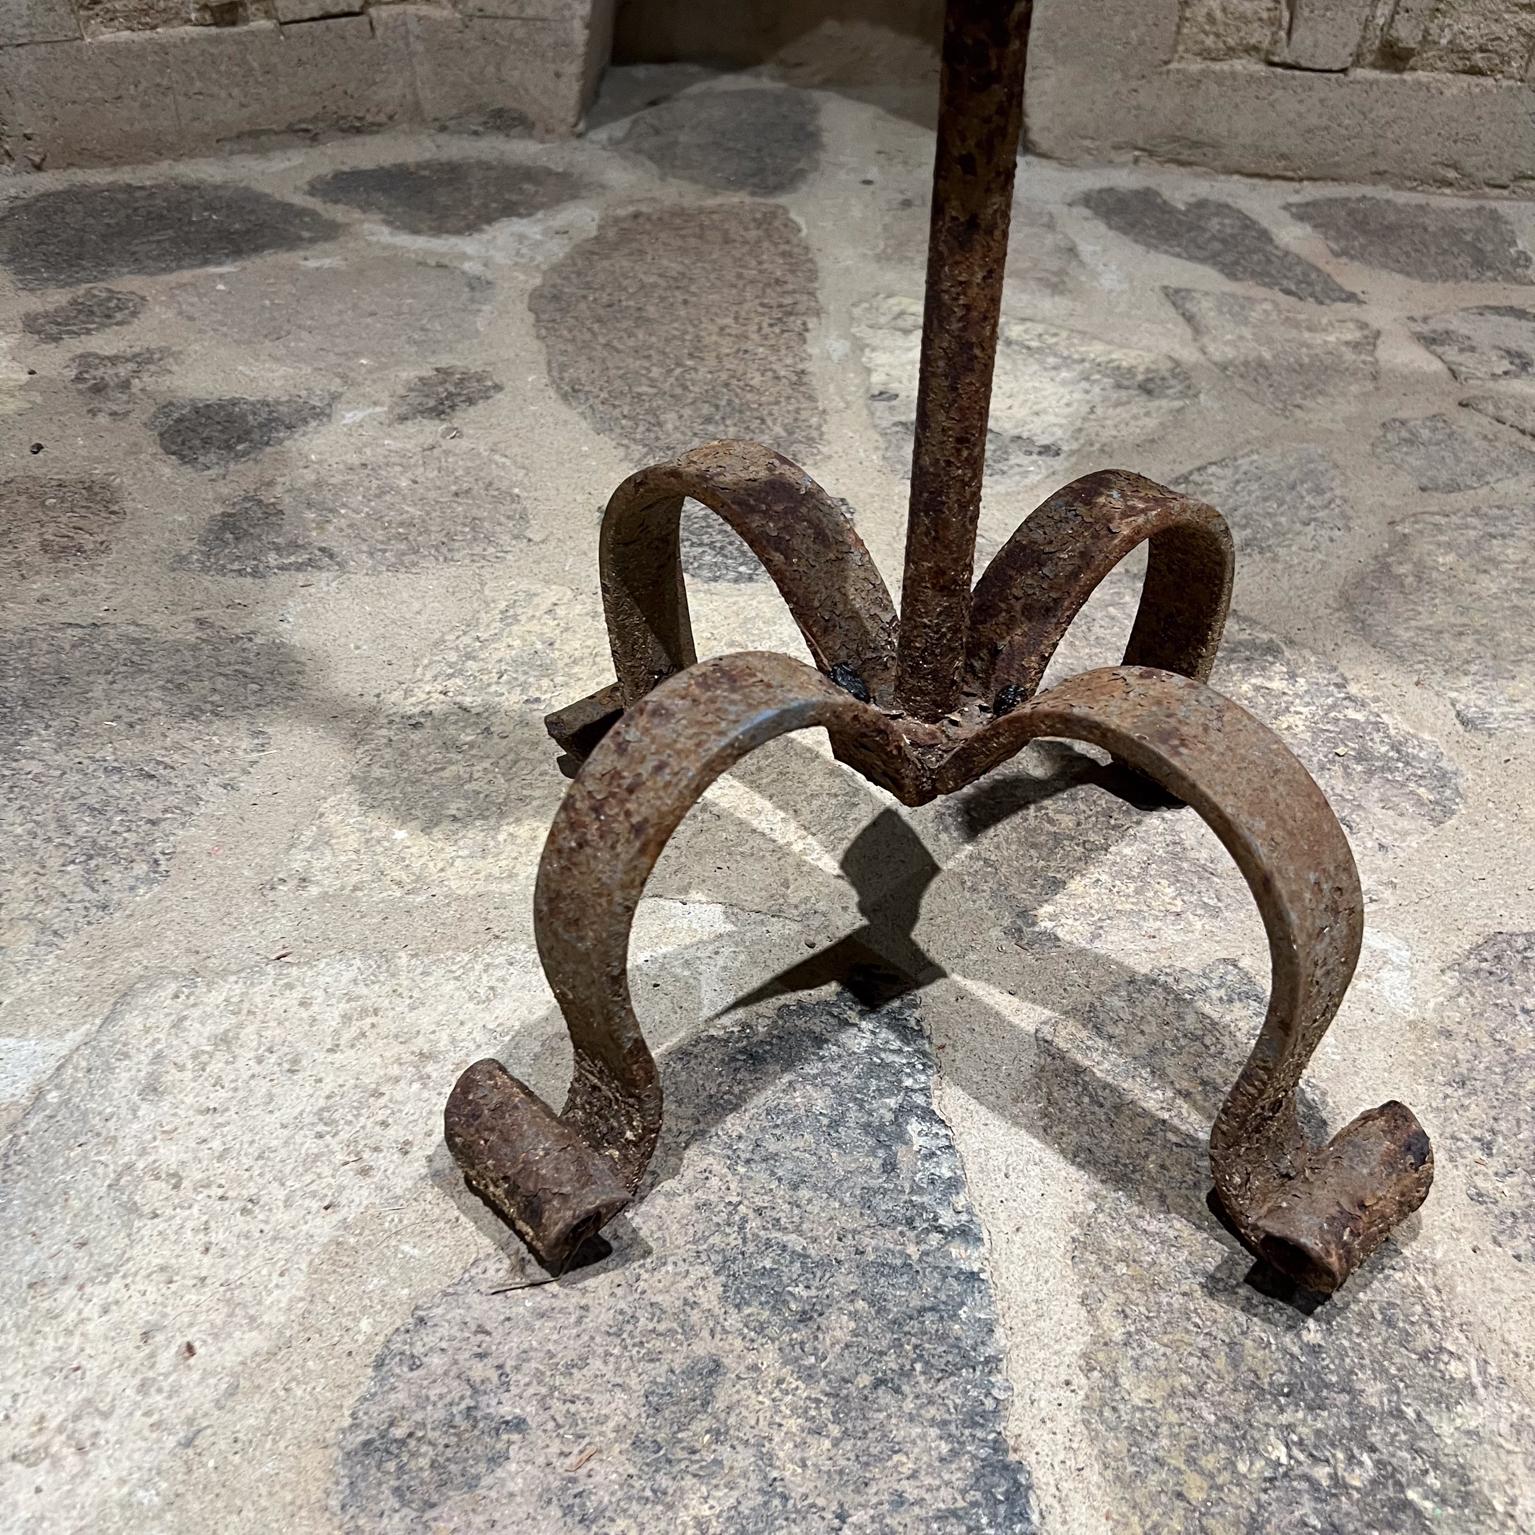 1940s Rustic Hand Forged Iron Standing Floor Candle Holder In Distressed Condition For Sale In Chula Vista, CA